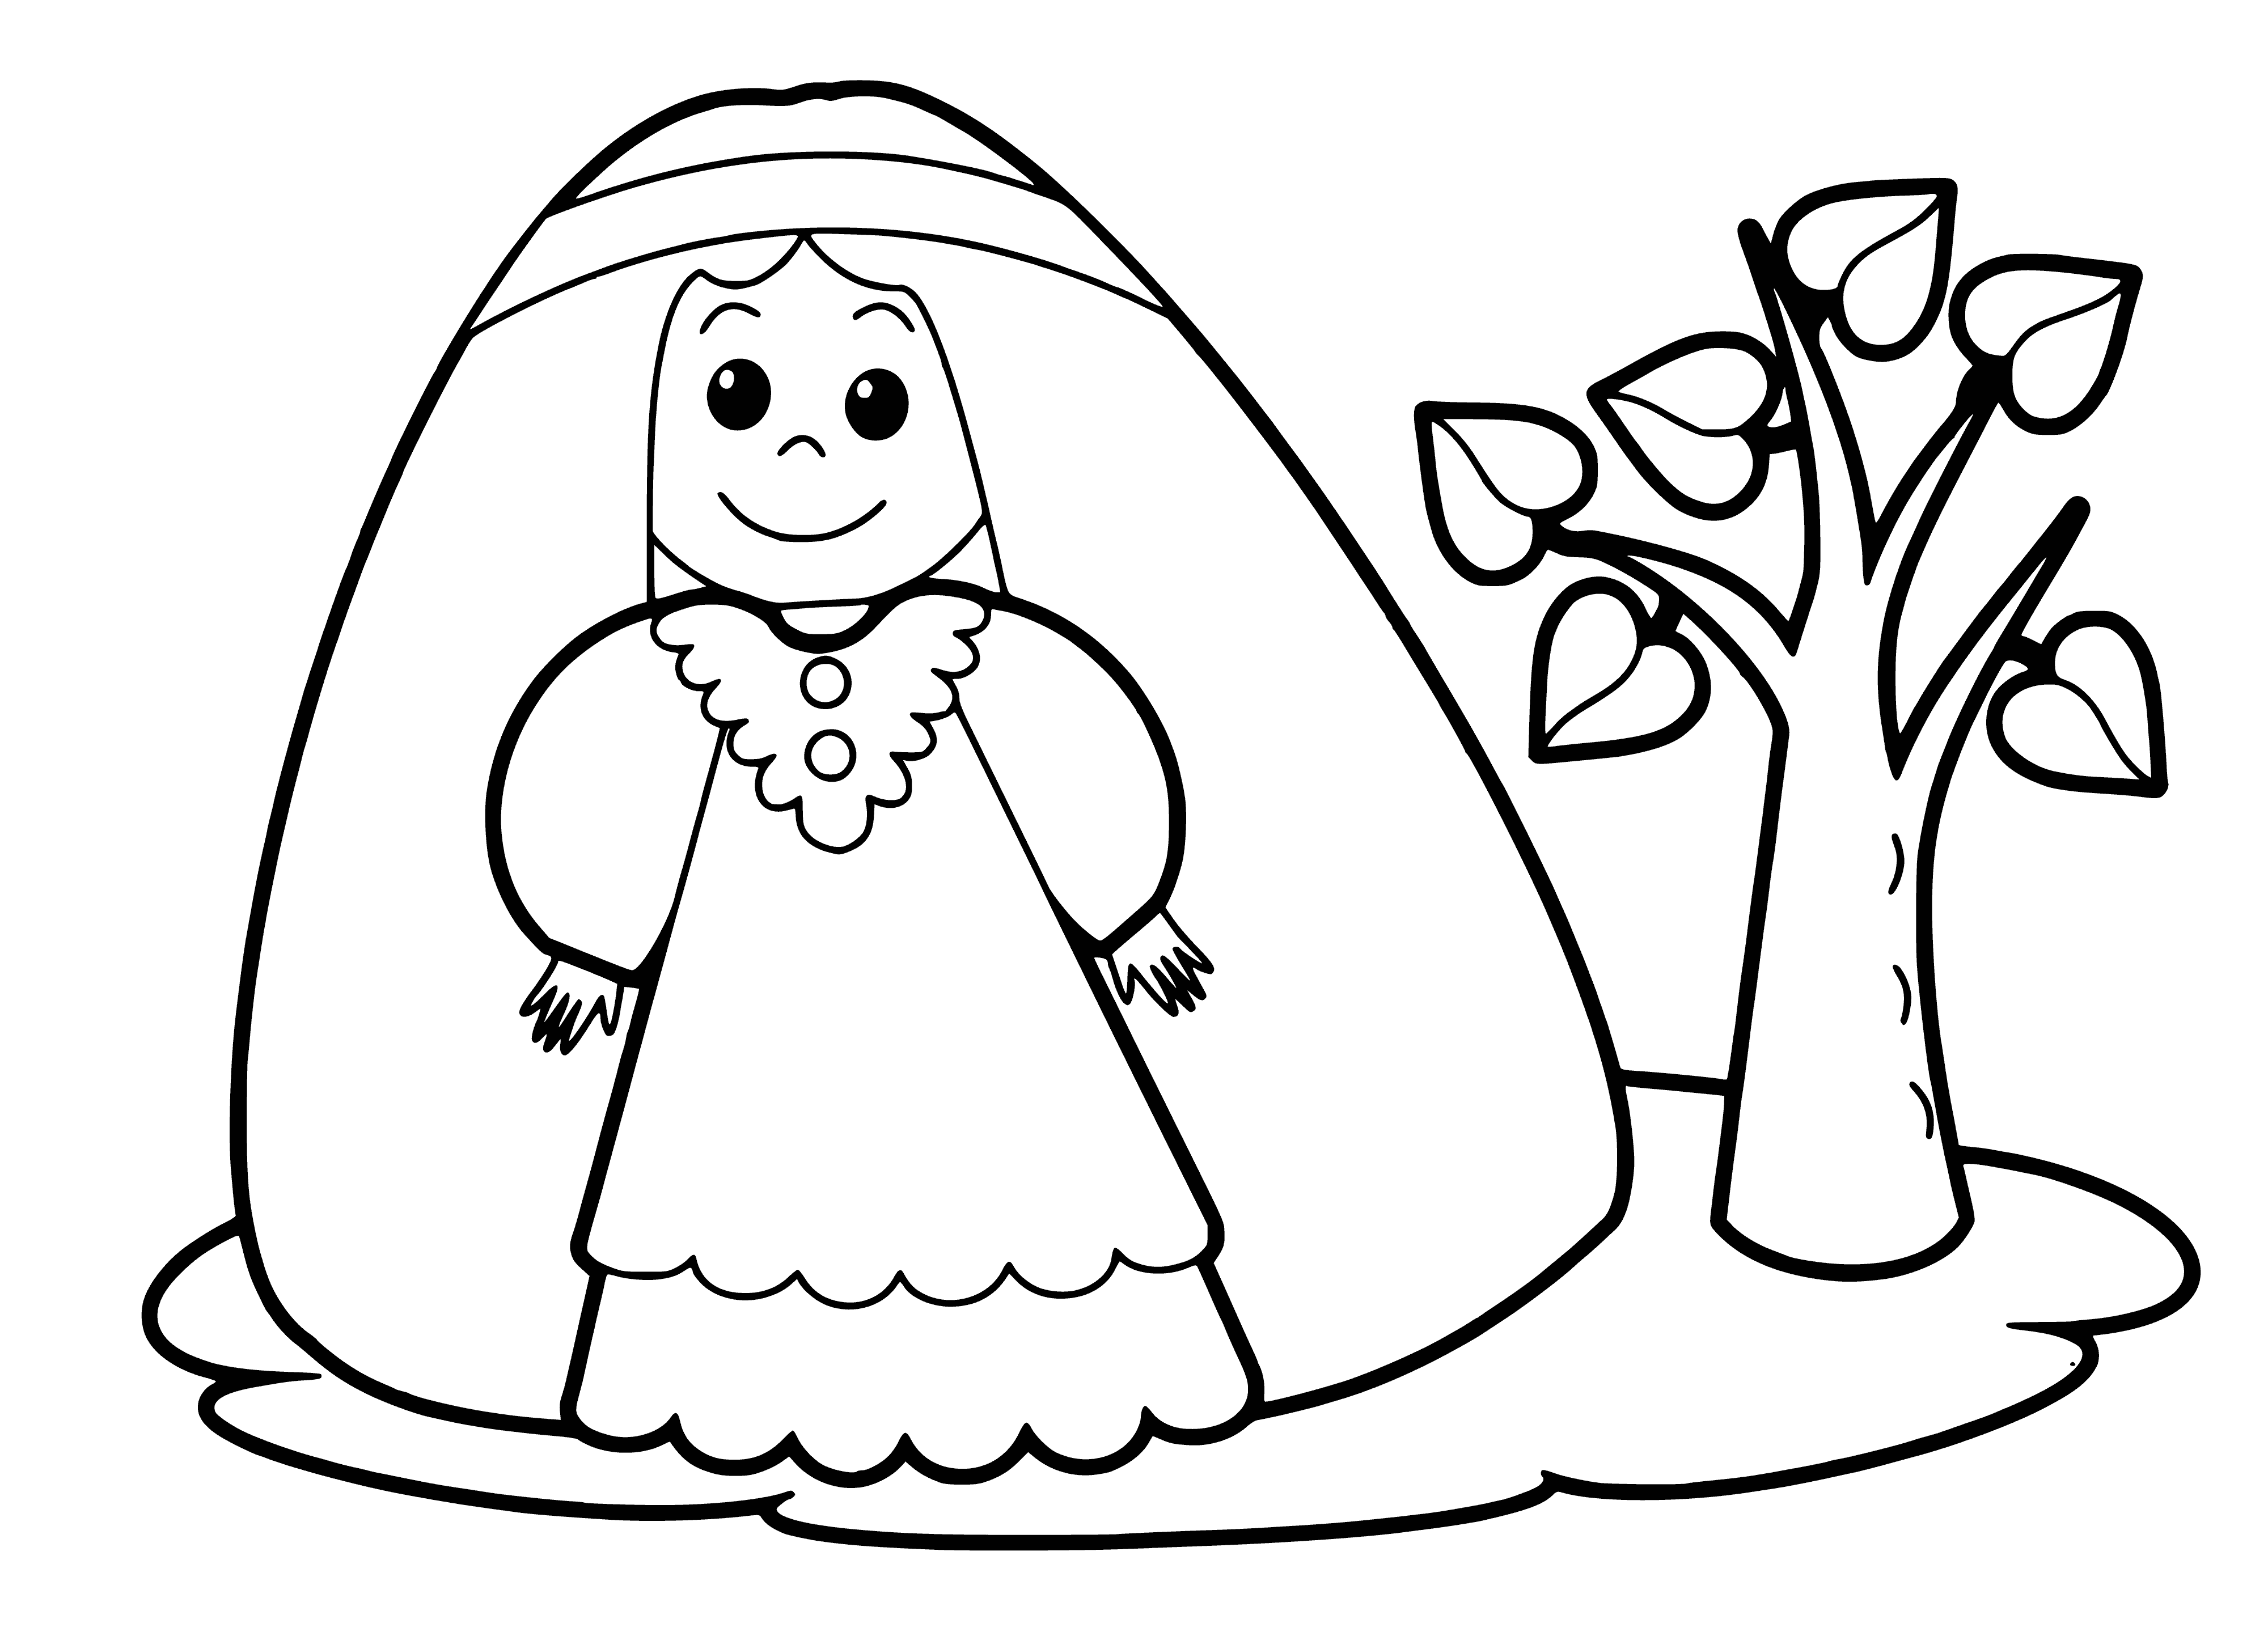 Girl by the tree coloring page